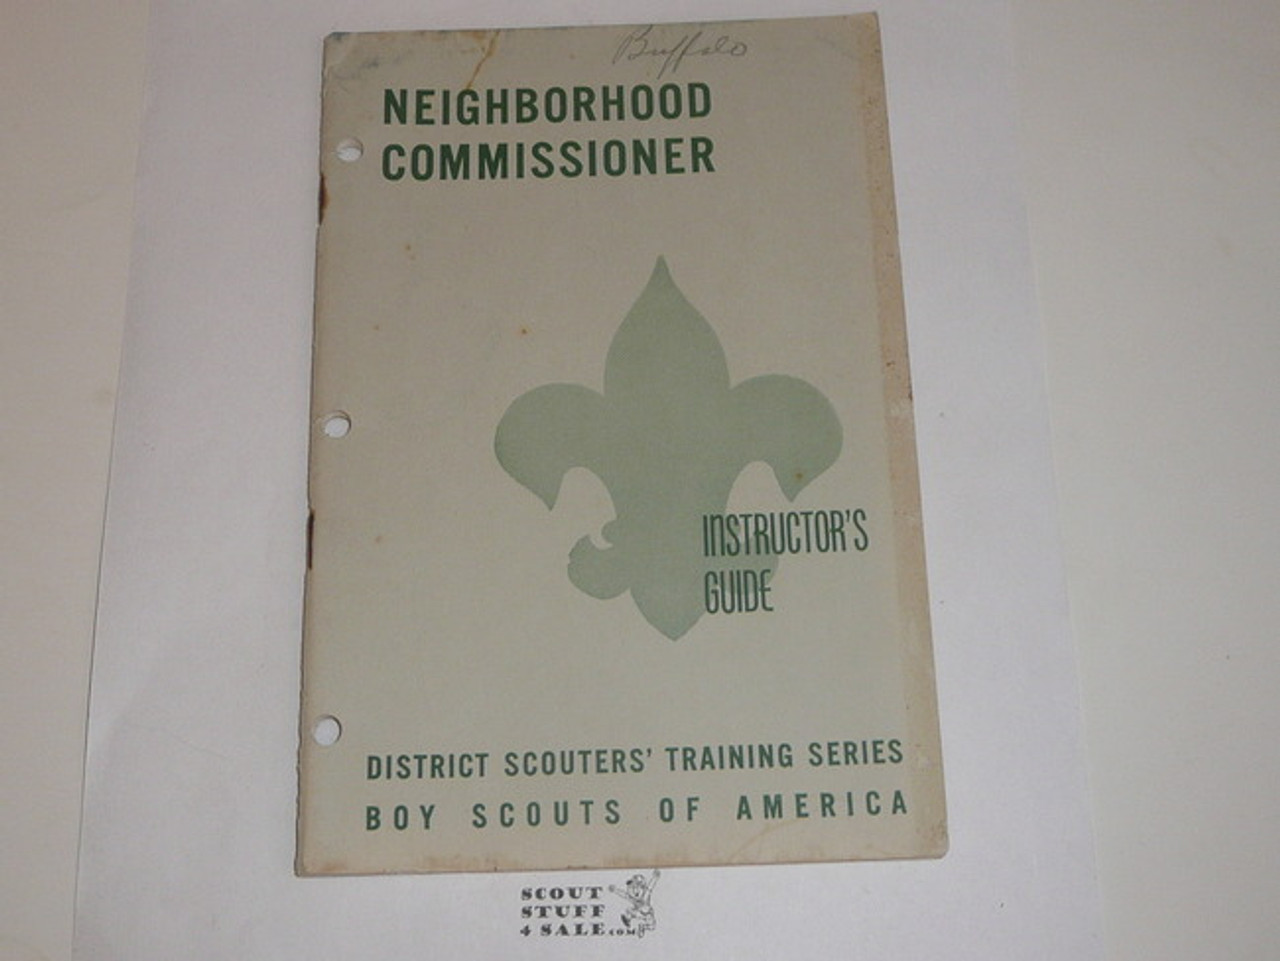 District Scouter's Training Series, Neighborhood Commissioner Instructor's Guide, 6-62 printing